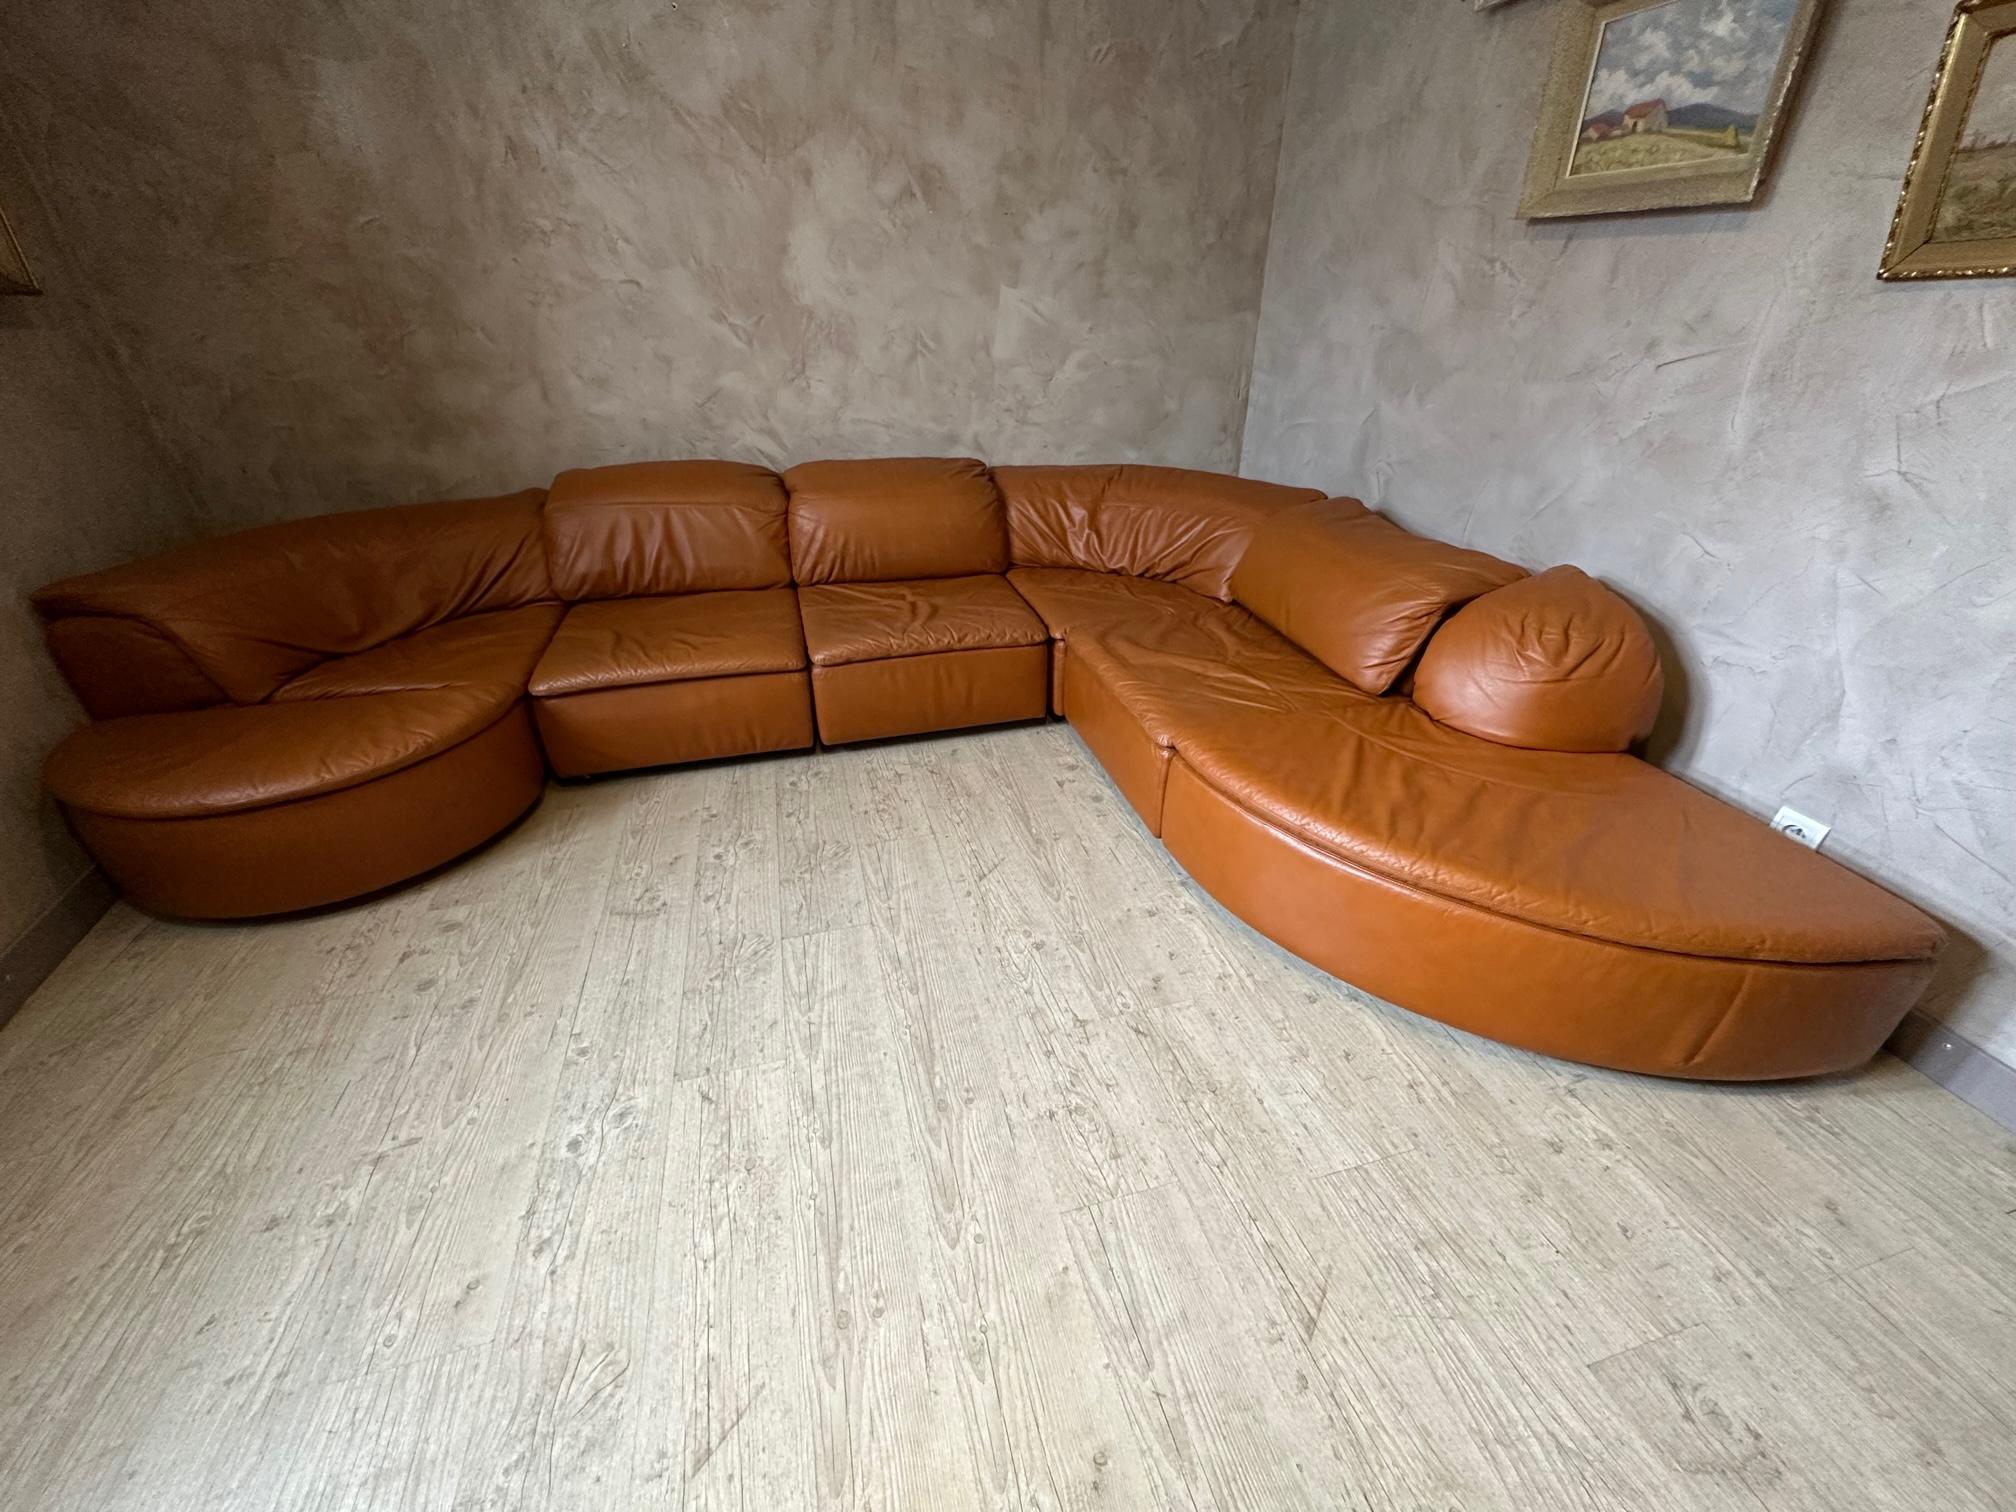 German 20th century Large Rounded Modular Leather Sofa by Laauser, 1970s